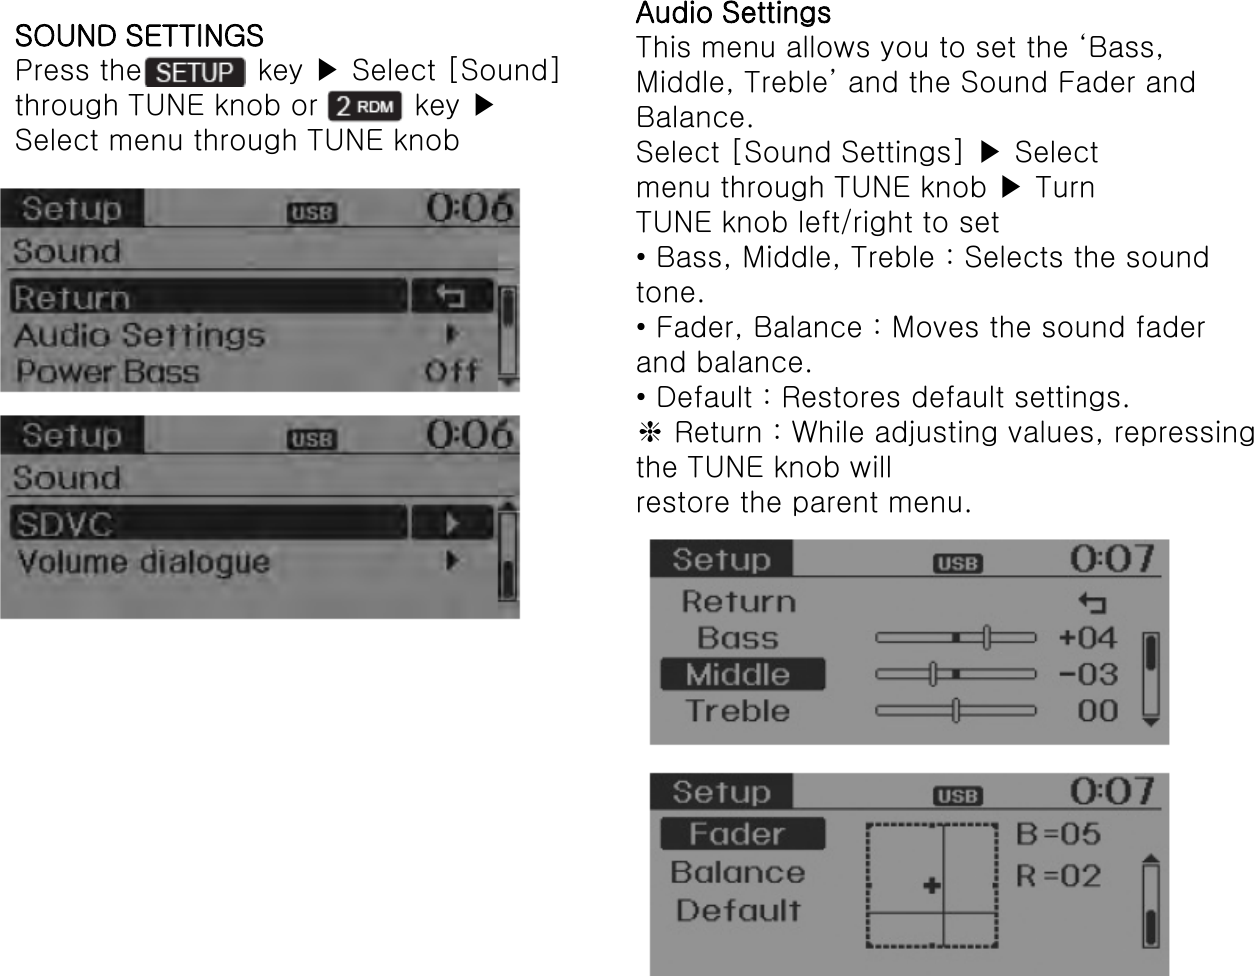 SOUND SETTINGSPress the            key ▶Select [Sound]through TUNE knob or          key ▶Select menu through TUNE knobAudio SettingsThis menu allows you to set the ‘Bass,Middle, Treble’ and the Sound Fader andBalance.Select [Sound Settings] ▶Selectmenu through TUNE knob ▶TurnTUNE knob left/right to set• Bass, Middle, Treble : Selects the soundtone.• Fader, Balance : Moves the sound faderand balance.• Default : Restores default settings.❈Return : While adjusting values, repressingthe TUNE knob willrestore the parent menu.